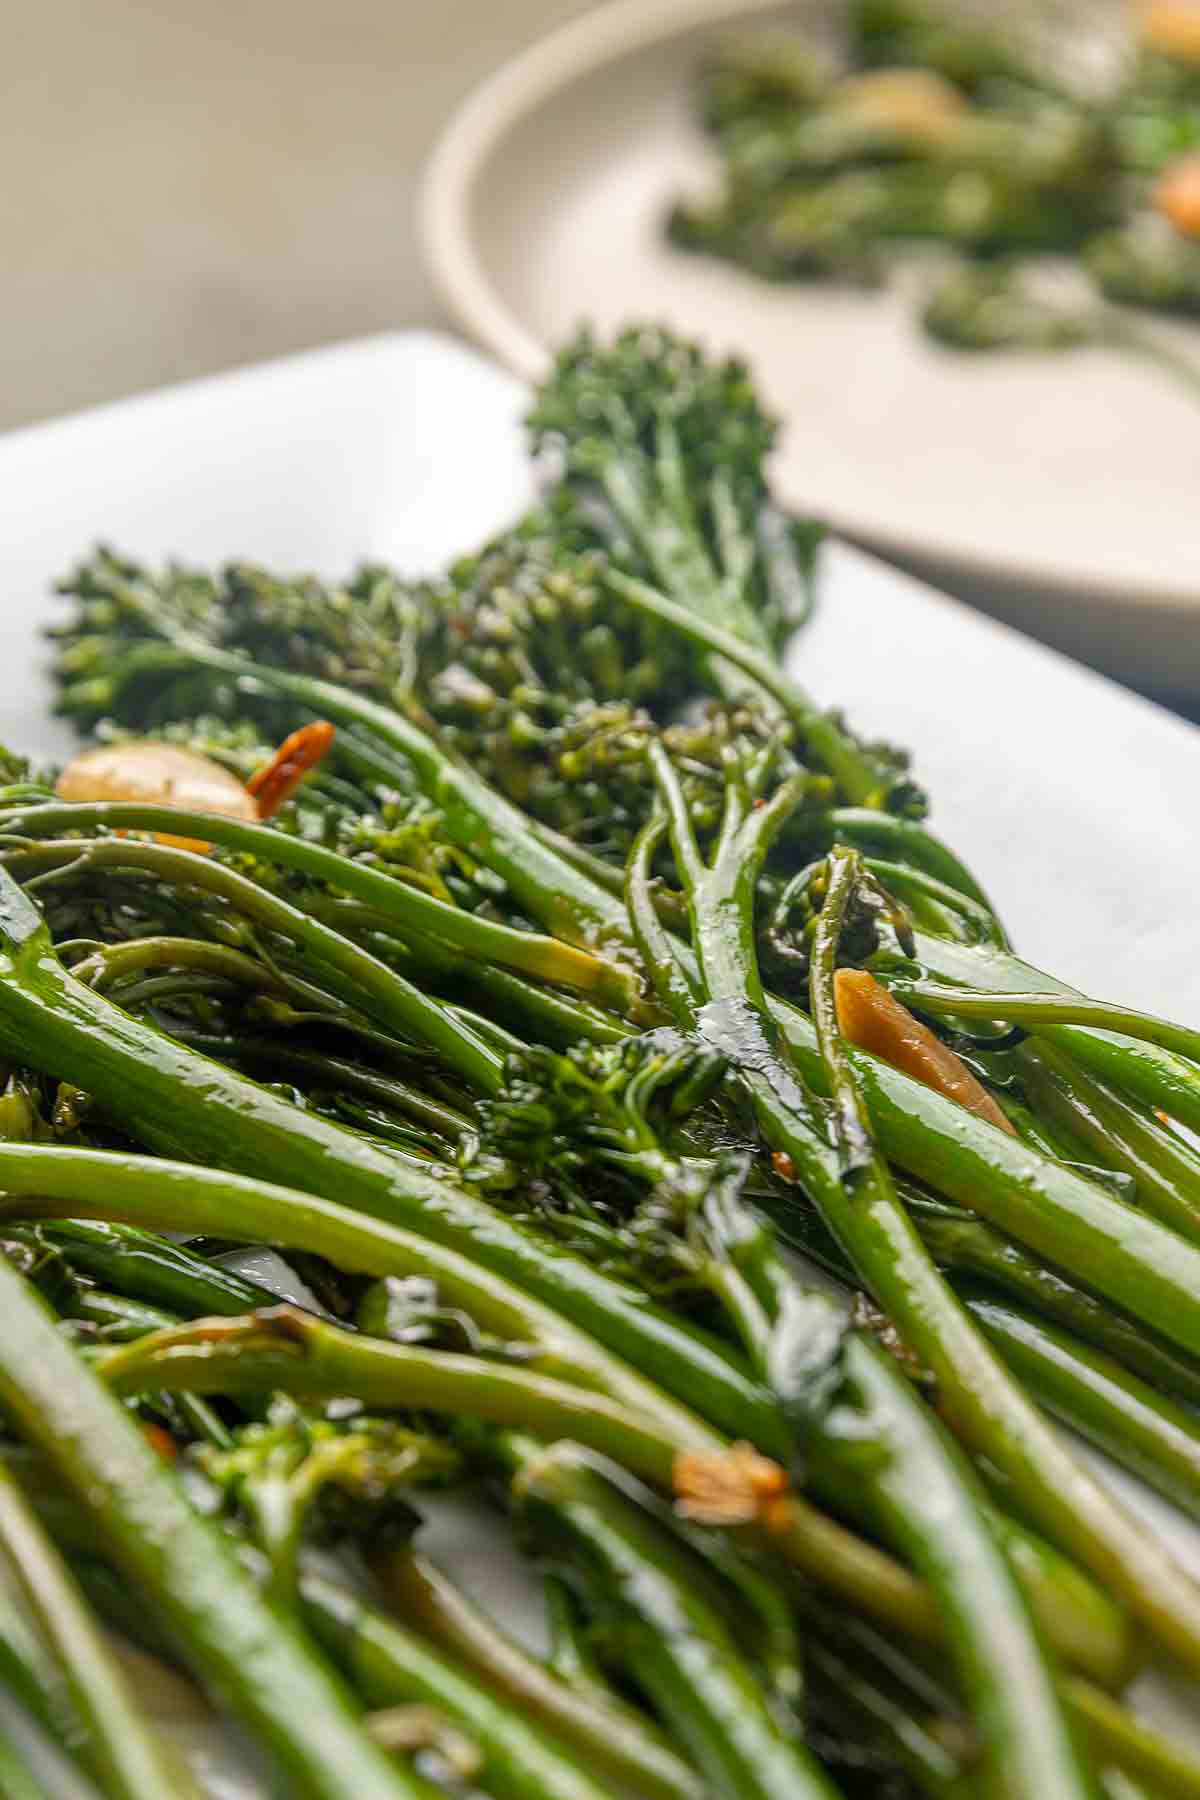 Seared broccolini and slices of browned garlic on a platter.